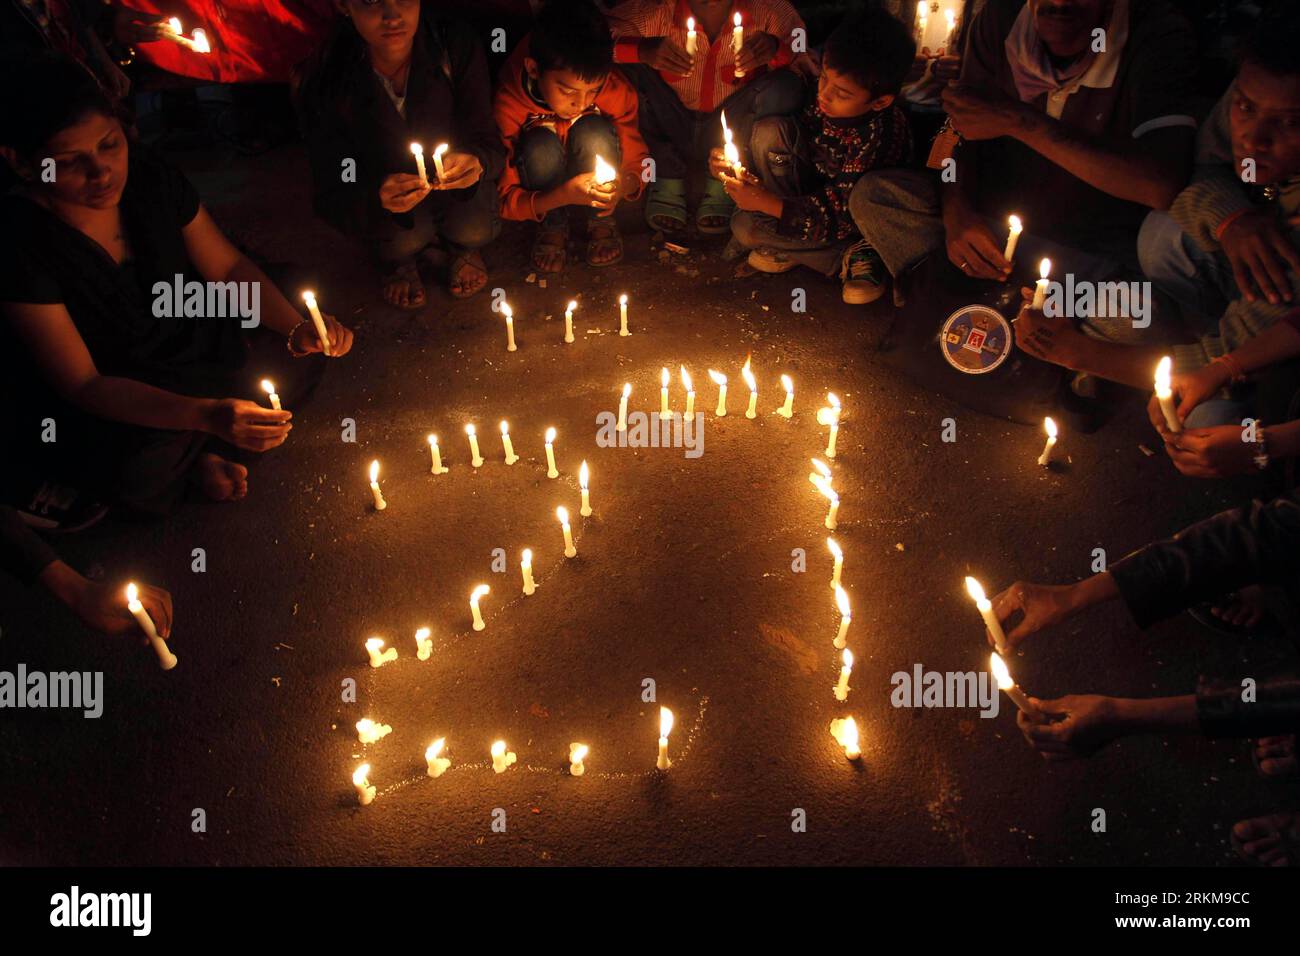 Bildnummer: 56575025  Datum: 02.11.2011  Copyright: imago/Xinhua (111203) -- BHOPAL, Dec. 3, 2011 (Xinhua) -- light candles during a ceremony to mark the 27th anniversary of the gas disaster in Bhopal, India, December 2, 2011. Gas leak from the Union Carbide plant in Bhopal on the night of 2-3 December 1984 killed thousands of and caused several thousands became physically handicapped. (Xinhua) (yc) INDIA-BHOPAL-GAS DISASTER-ANNIVERSARY PUBLICATIONxNOTxINxCHN Gesellschaft Jahrestag 27 Giftgas Katastrophe Unglück Bhopalunglück Demo Gedenken xjh x0x premiumd 2011 quer      56575025 Date 02 11 20 Stock Photo